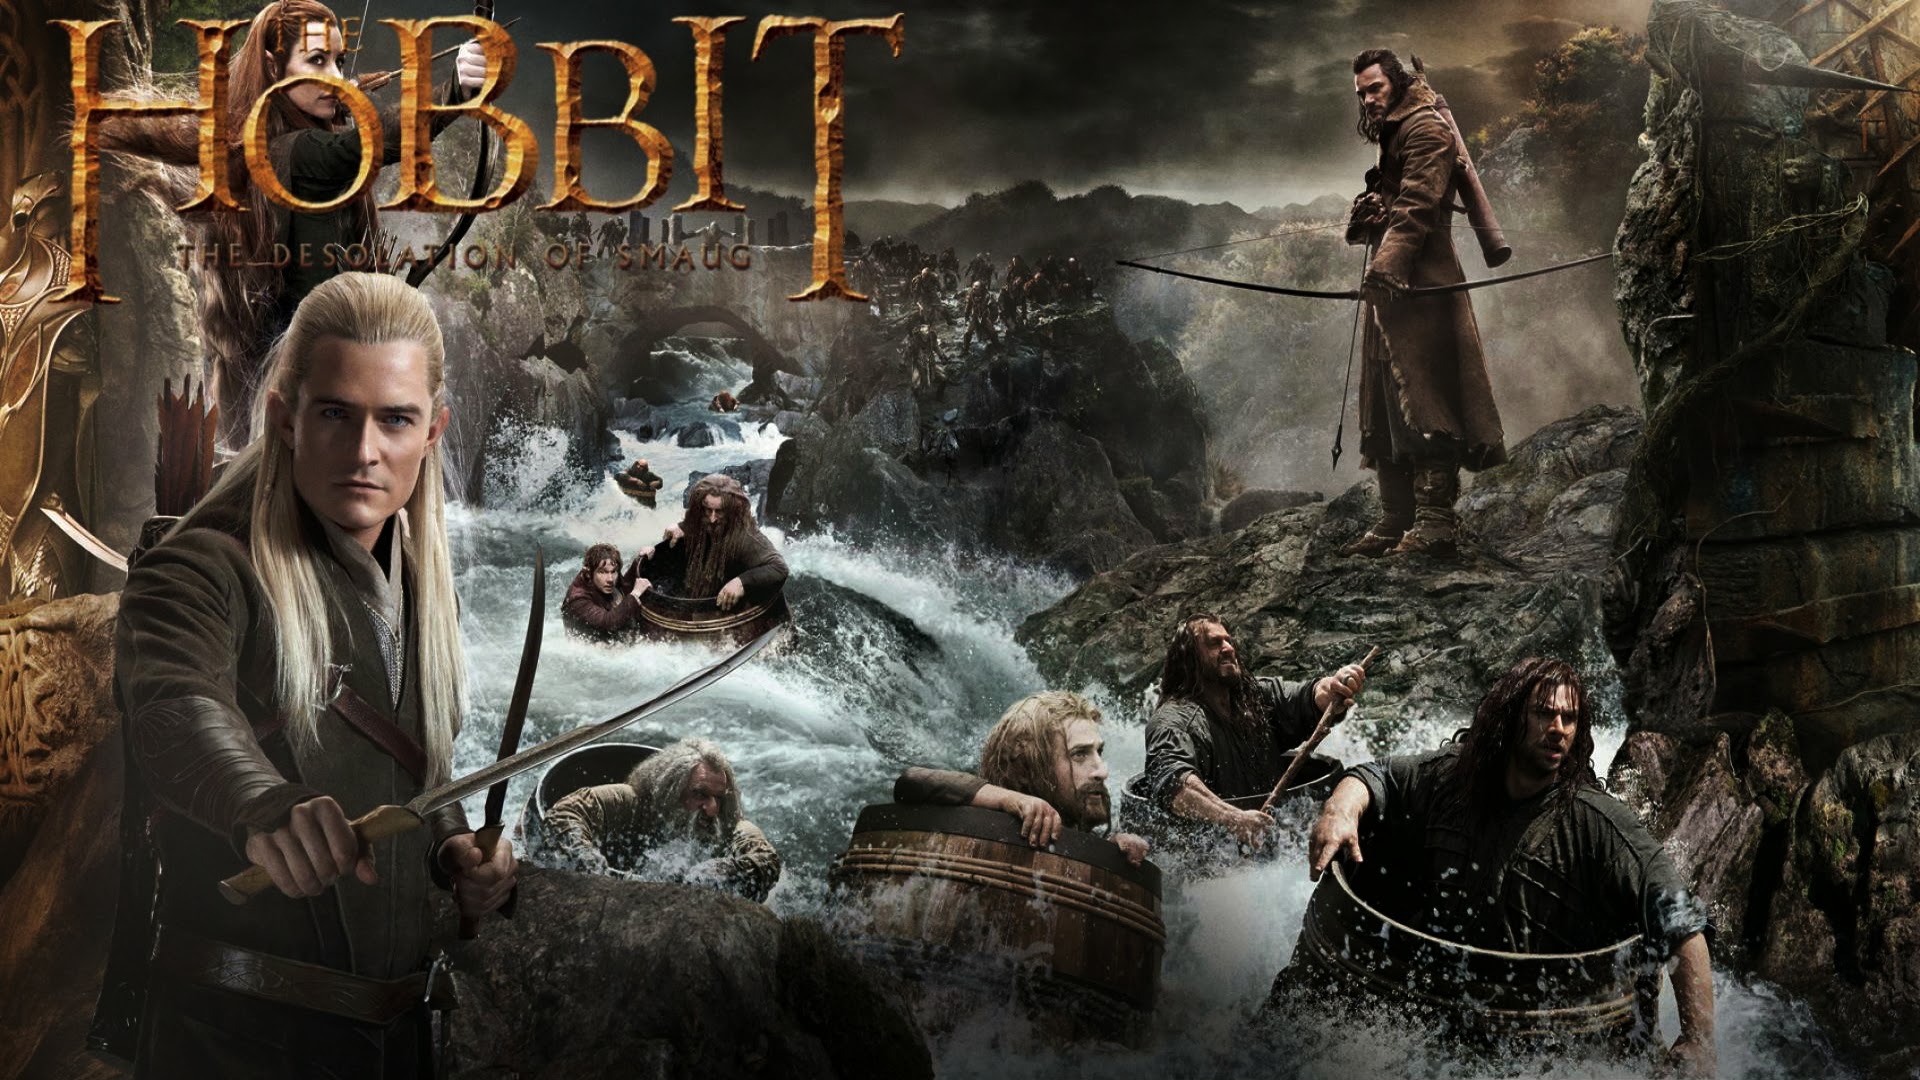 The Hobbit The Desolation Of Smaug HD Wallpaper Picture Image